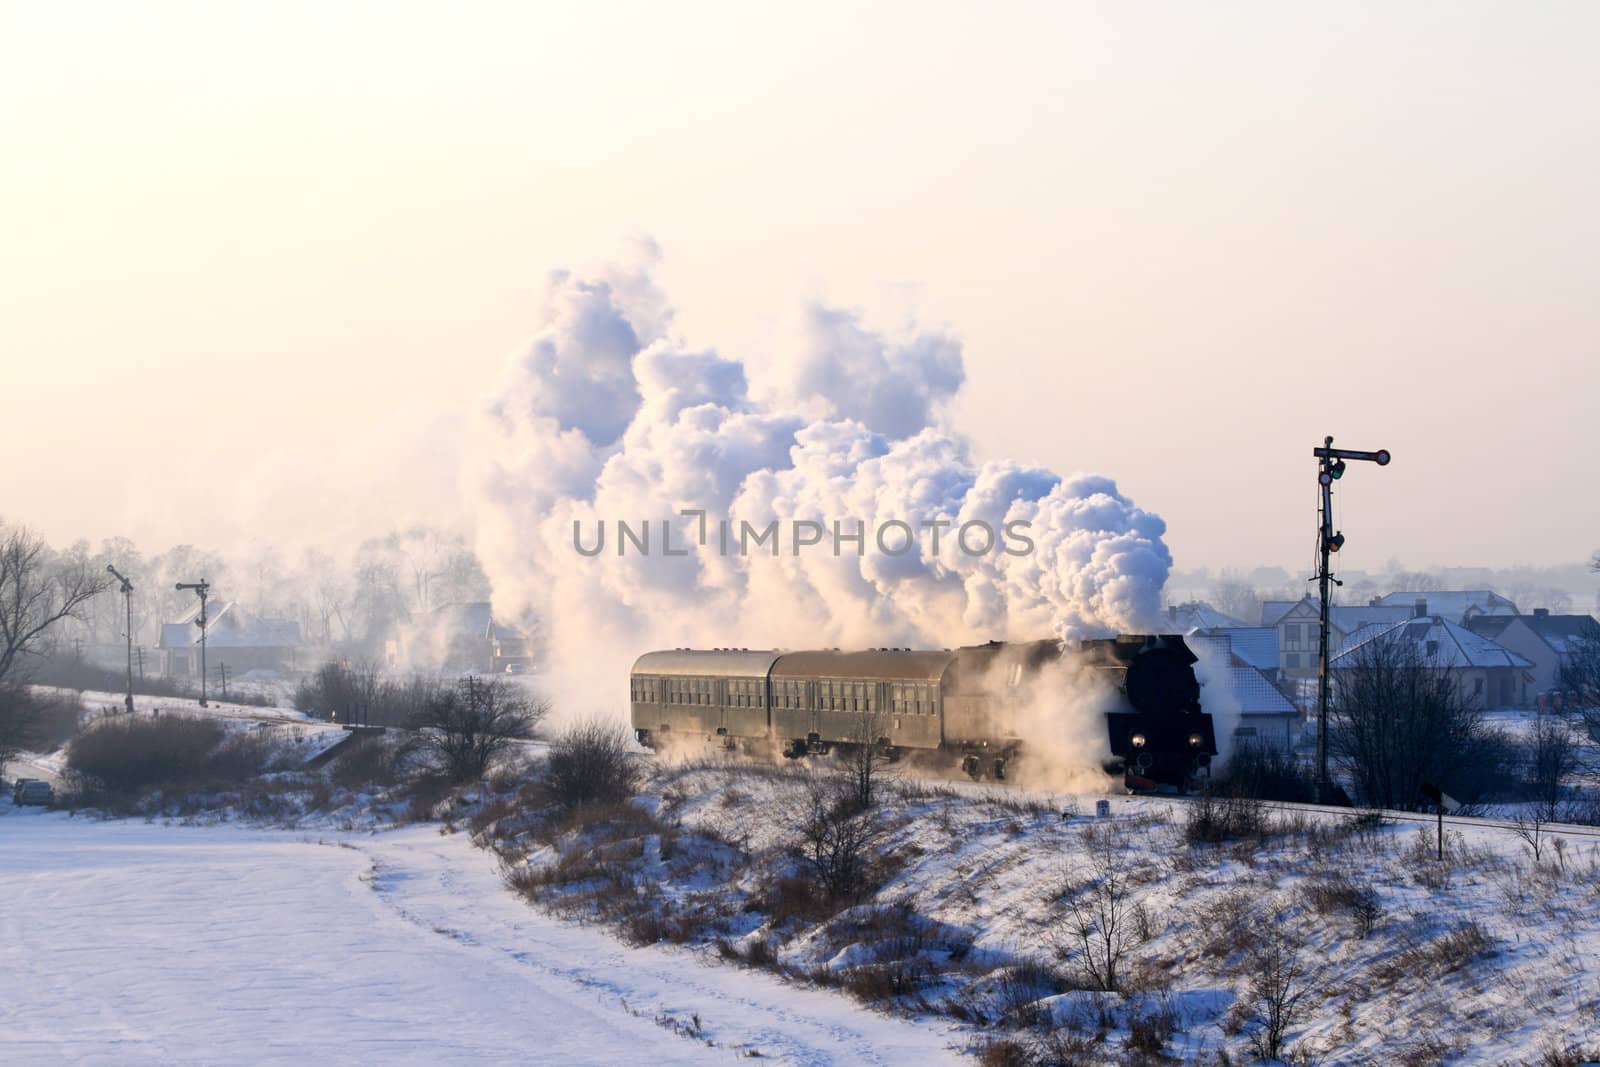 Vintage steam train passing through snowy countryside